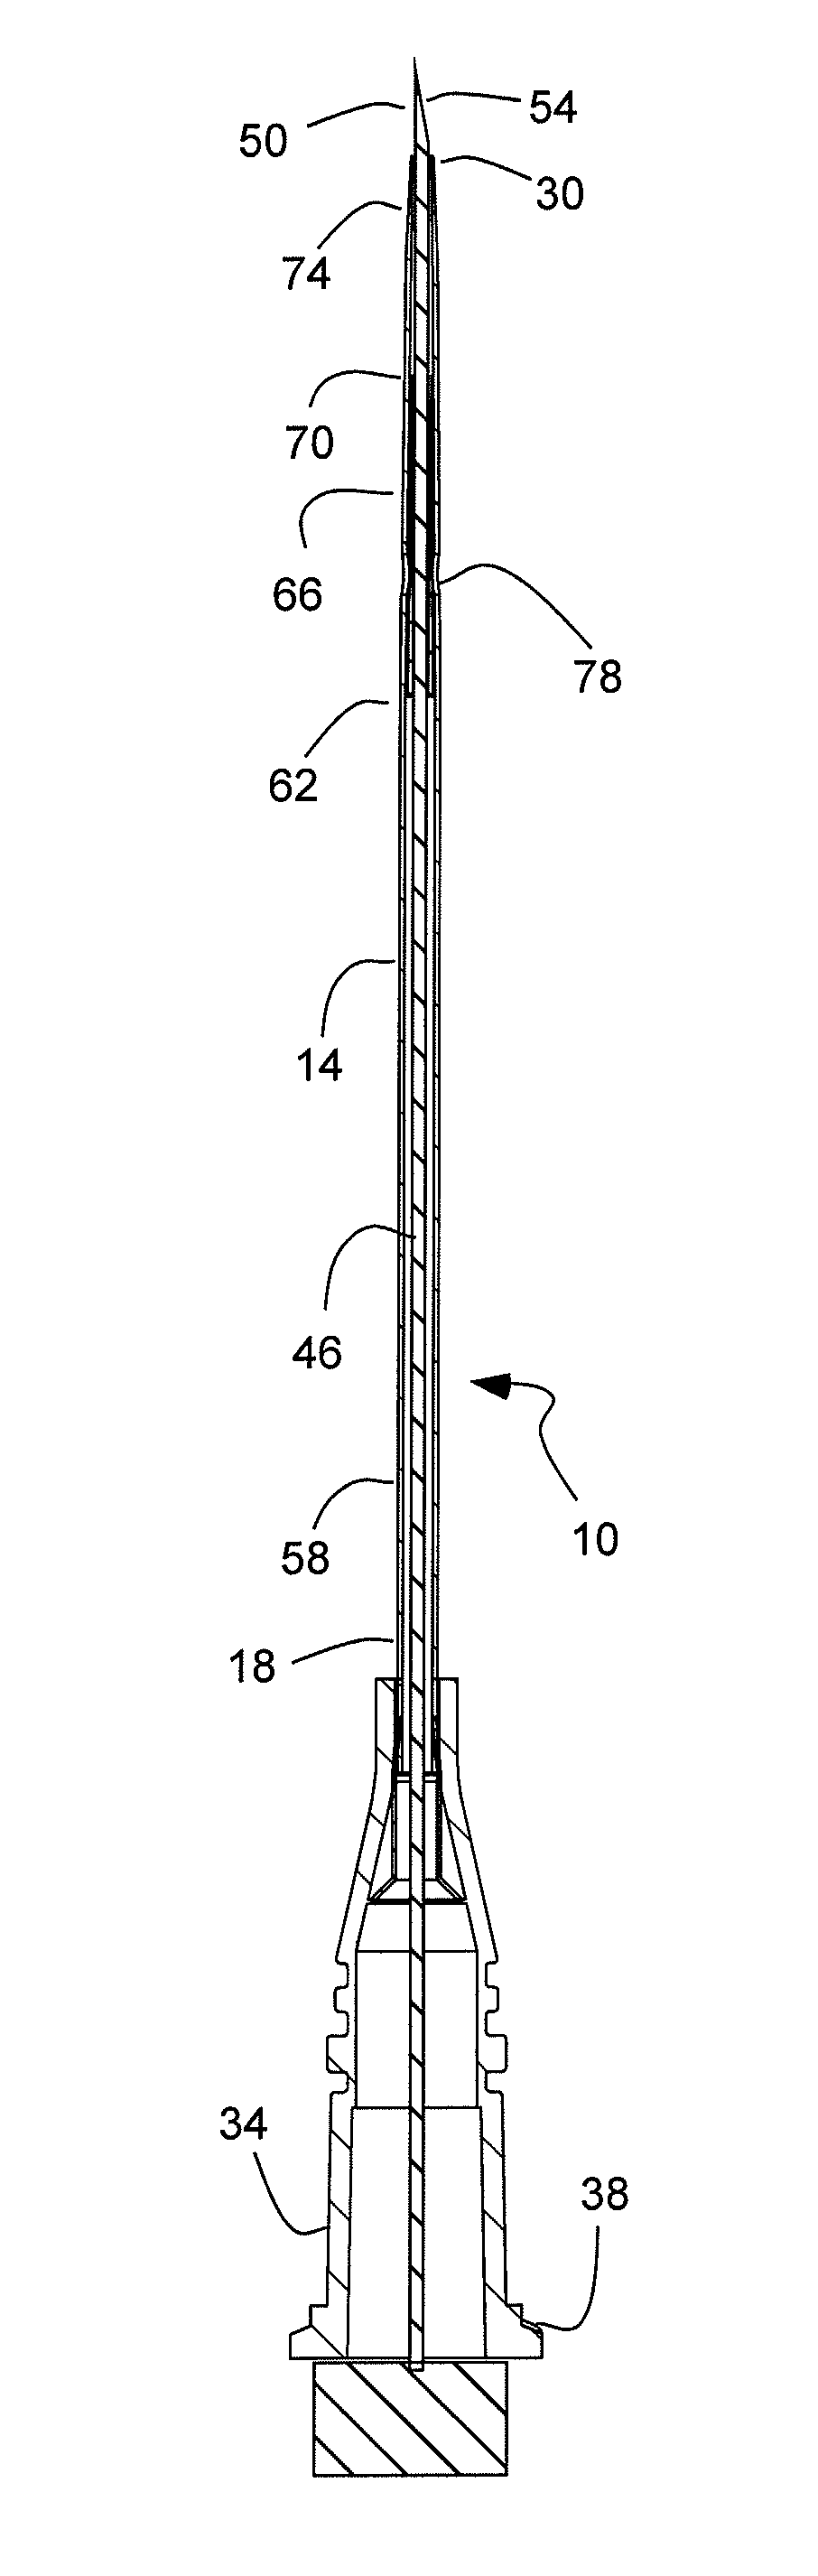 High-flow tapered peripheral iv catheter with side outlets